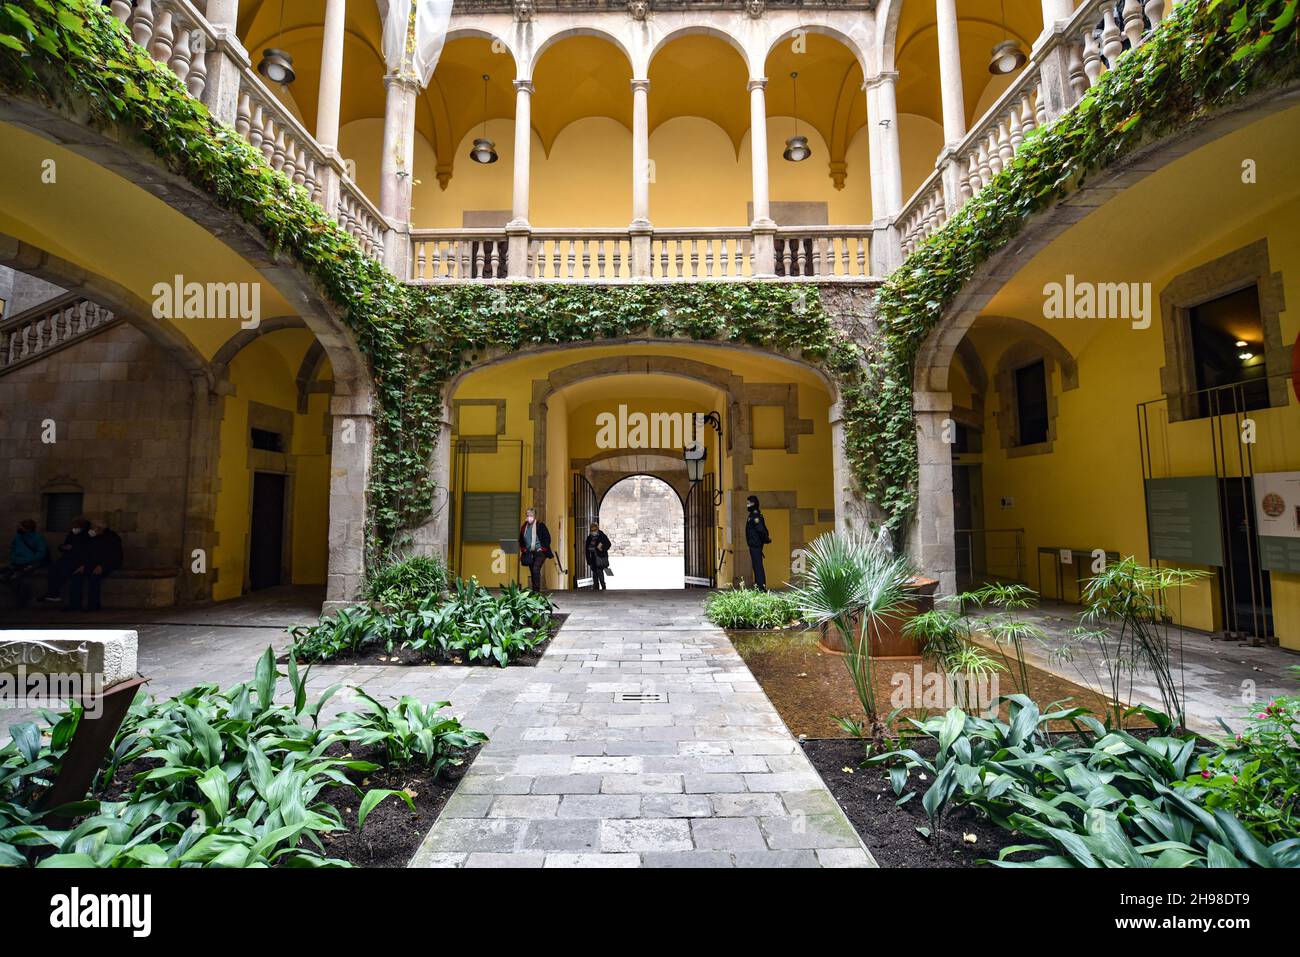 Barcelona, Spain - 23 Nov, 2021: Interior Courtyard of the Archive of the Crown of Aragon in Barcelona , Catalonia, Spain Stock Photo